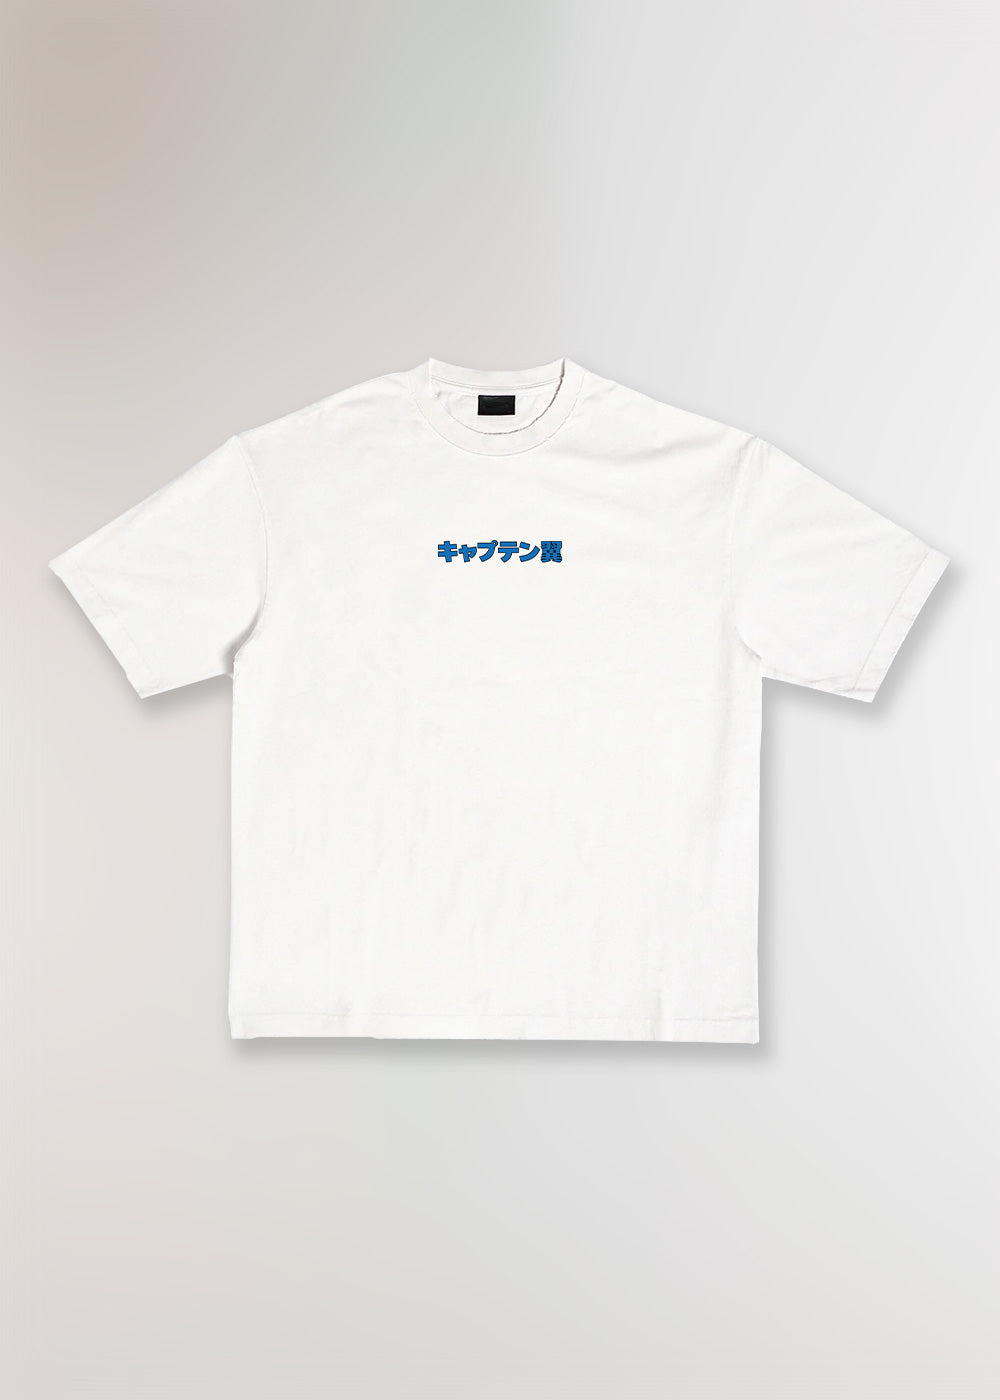 MADE IN JAPAN - CHAMPIONS® WHITE T-SHIRT